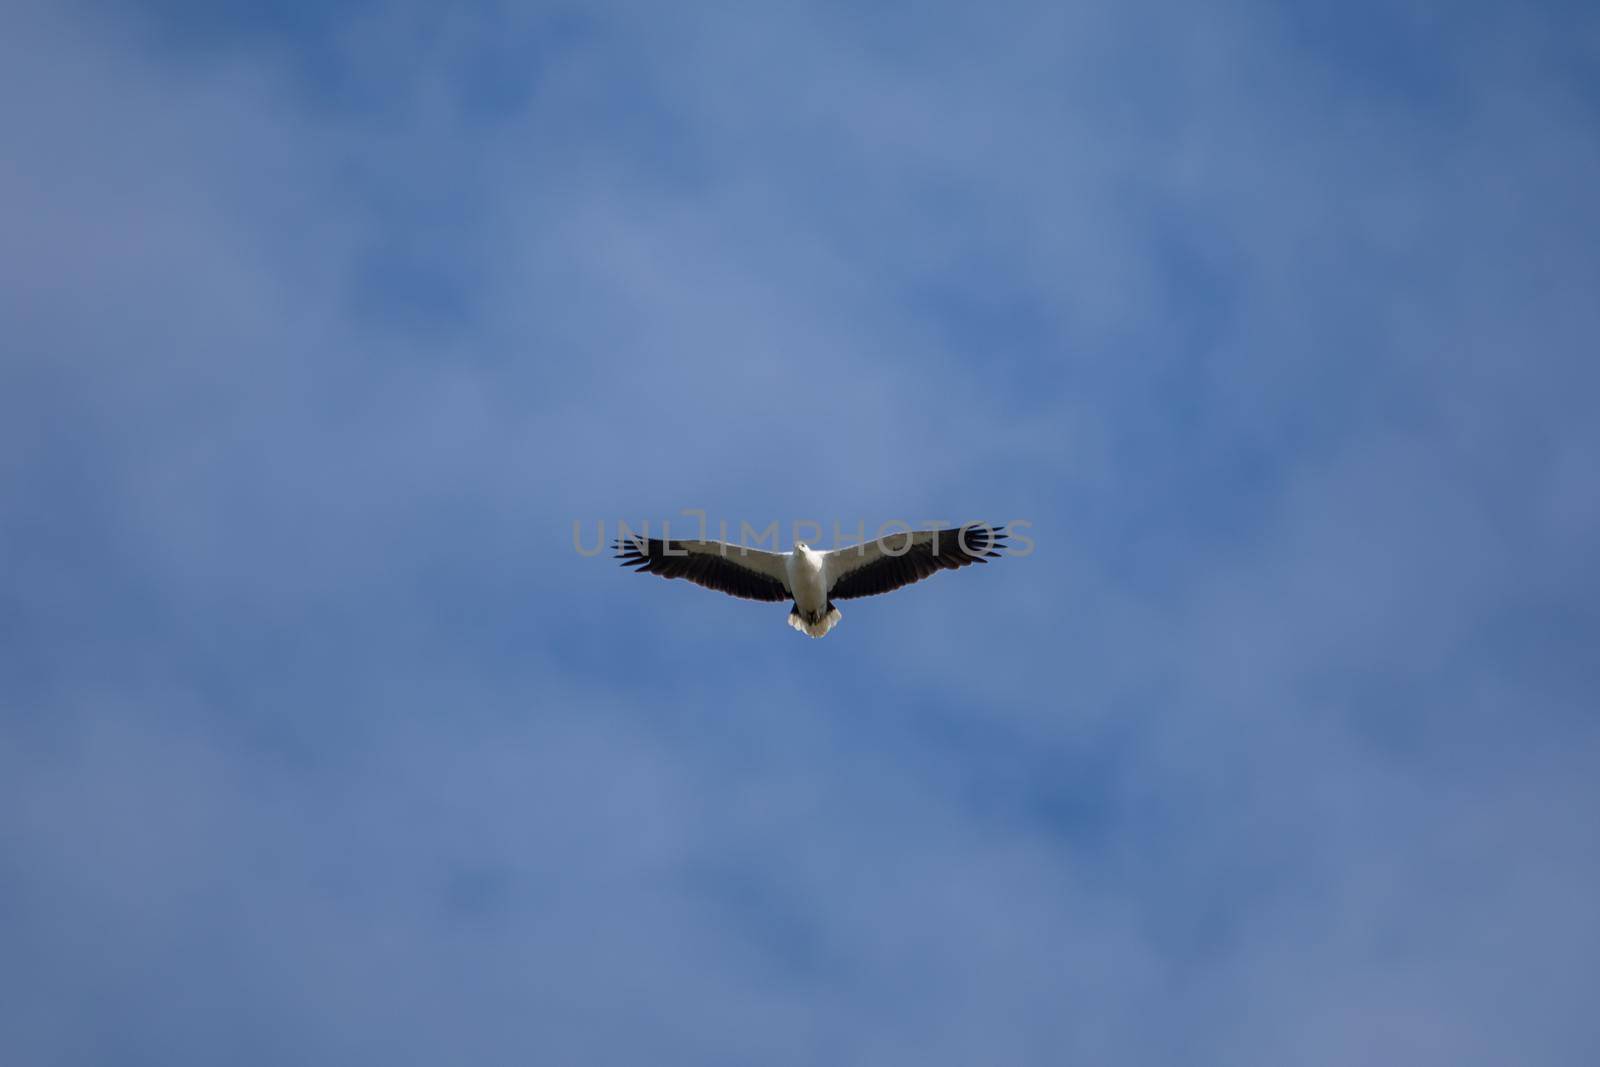 White-bellied sea eagle flying in the air. High quality photo